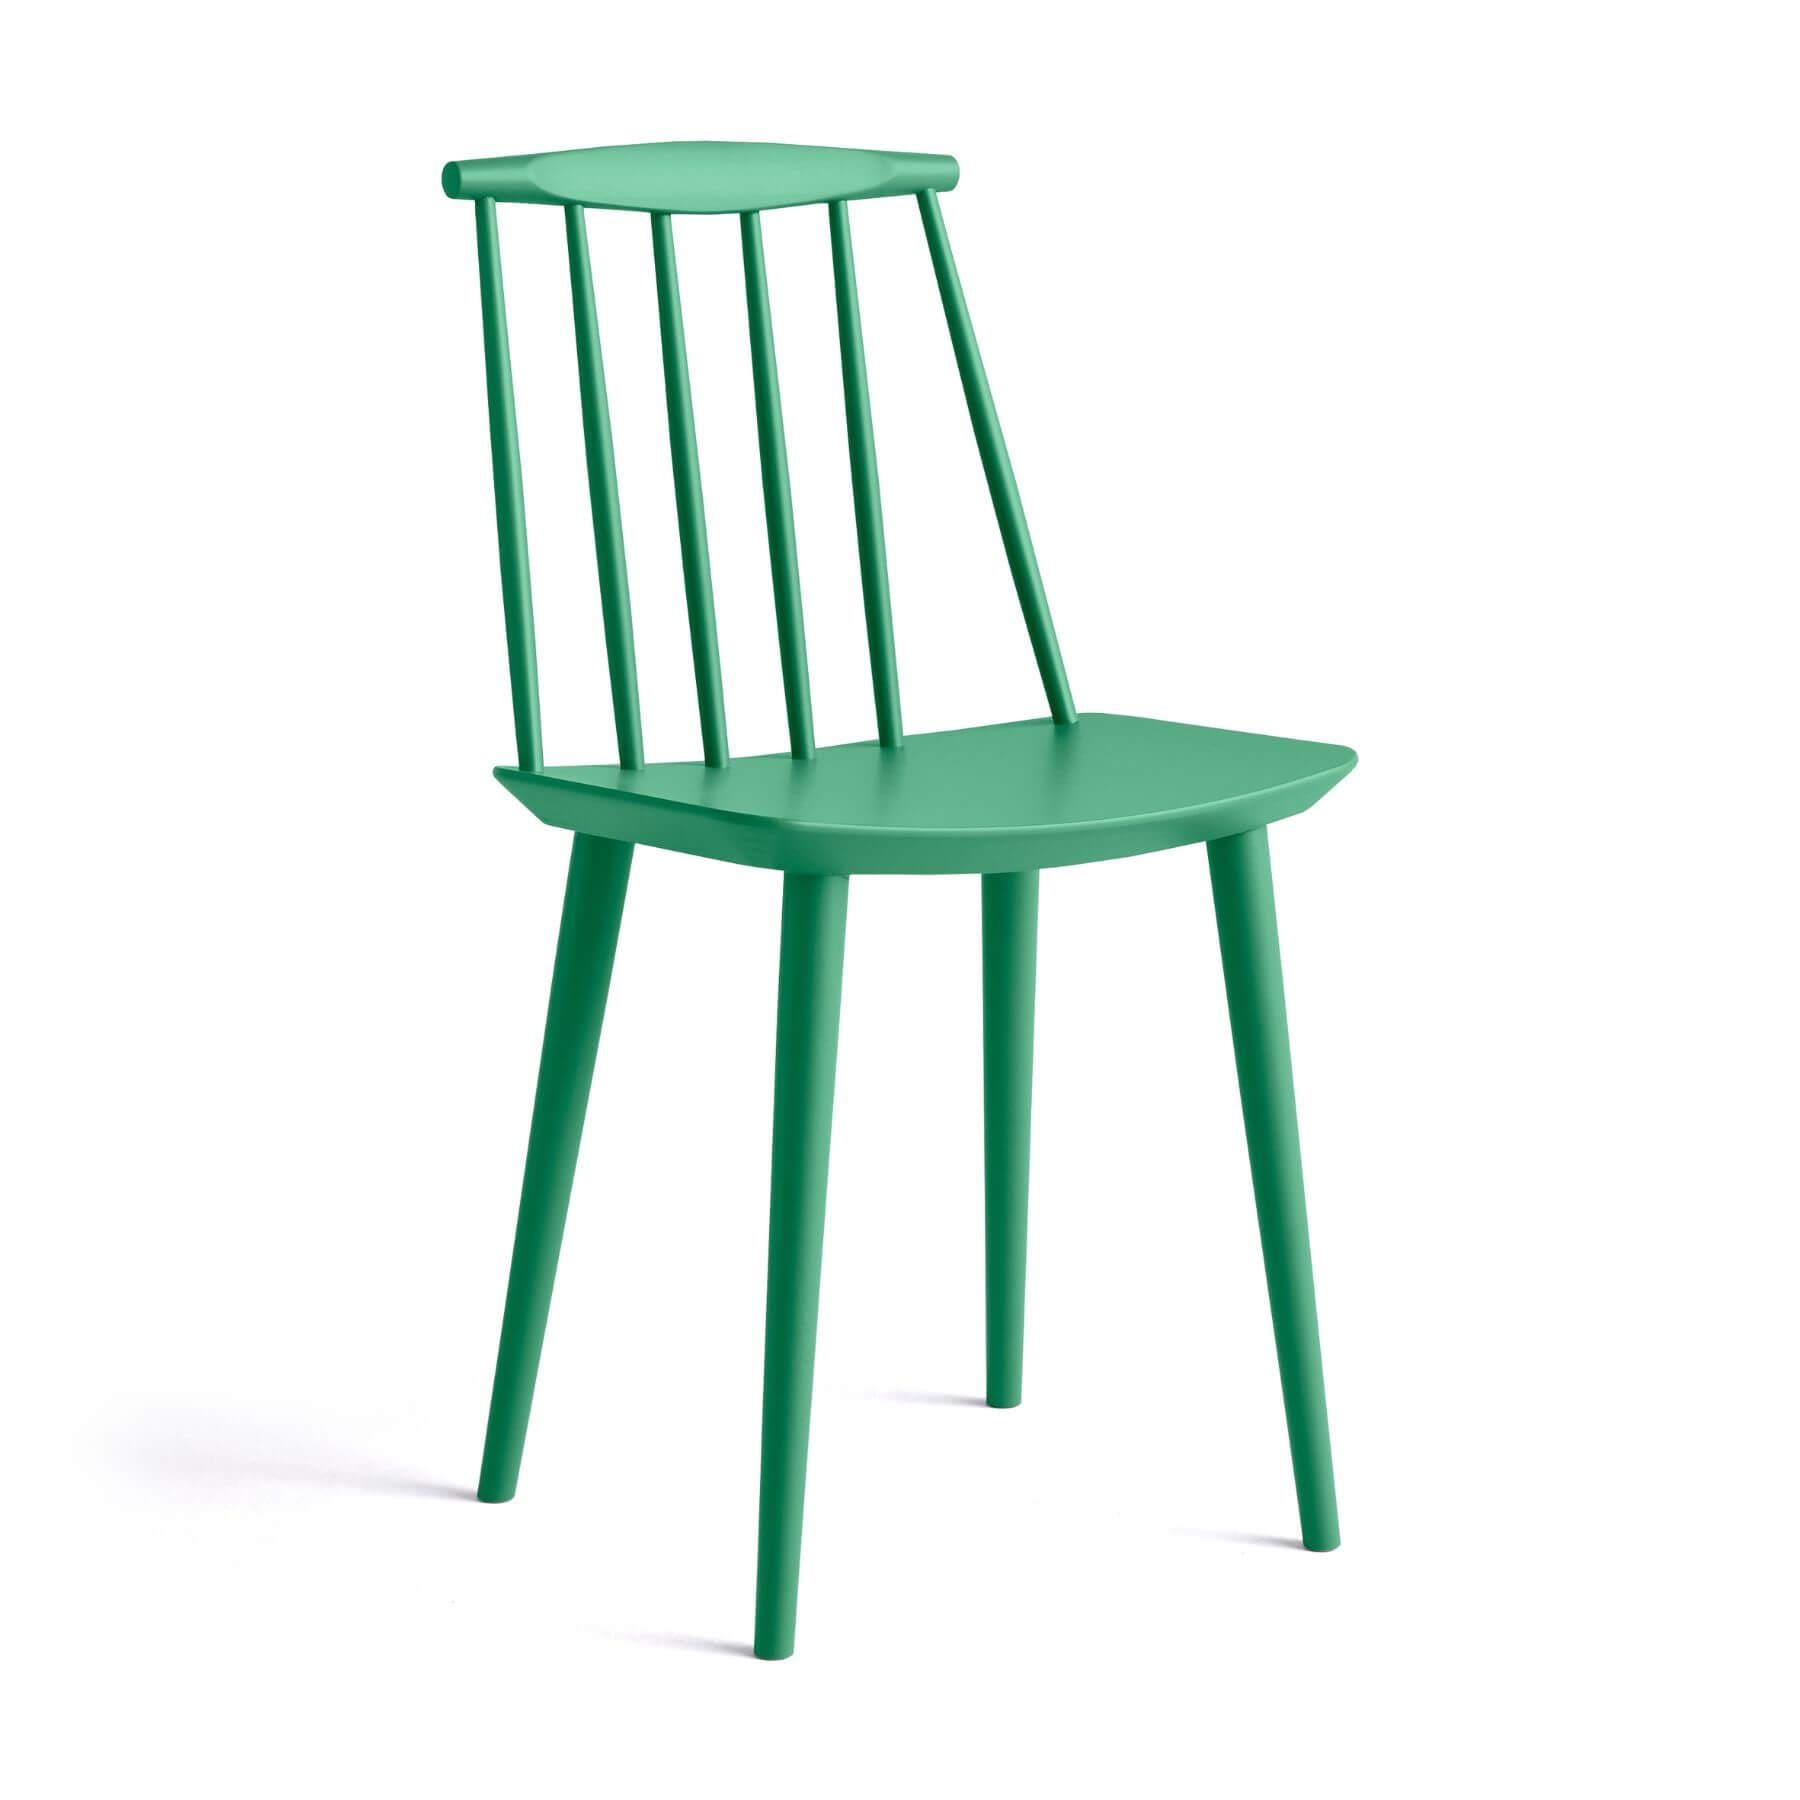 Hay Jseries 77 Dining Chair Beech Lacquered Jade Green Standard Gliders Designer Furniture From Holloways Of Ludlow